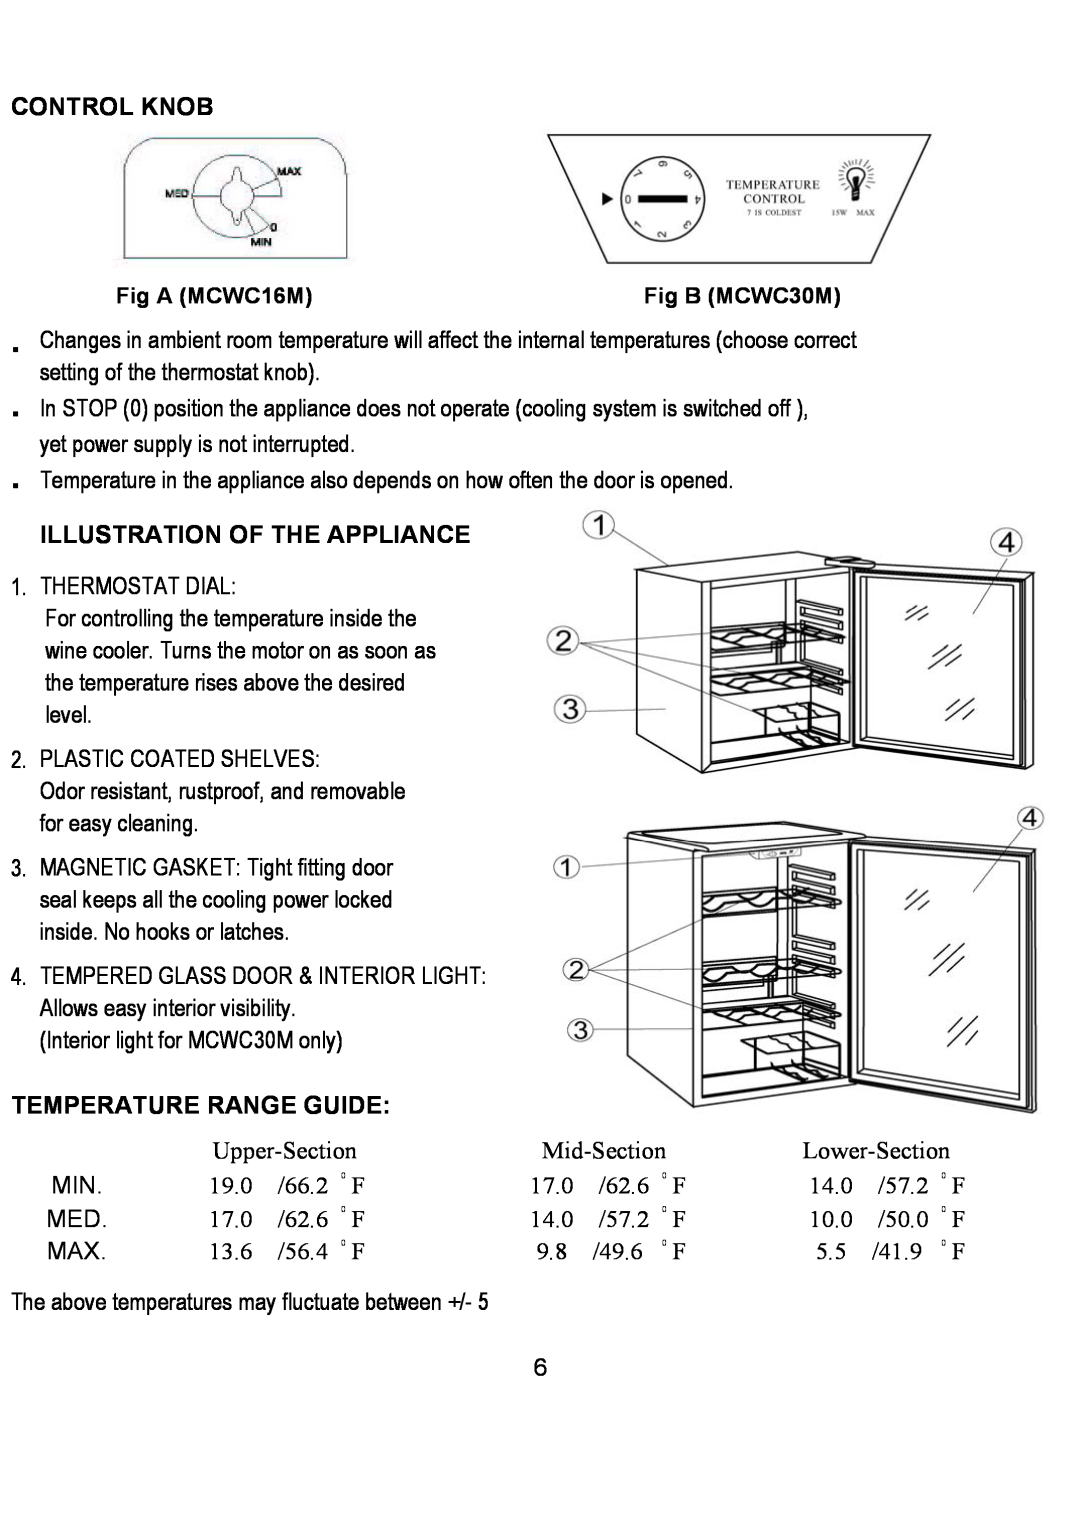 Magic Chef MCWC30M, MCWC16M operating instructions Control Knob, Illustration Of The Appliance, Temperature Range Guide 